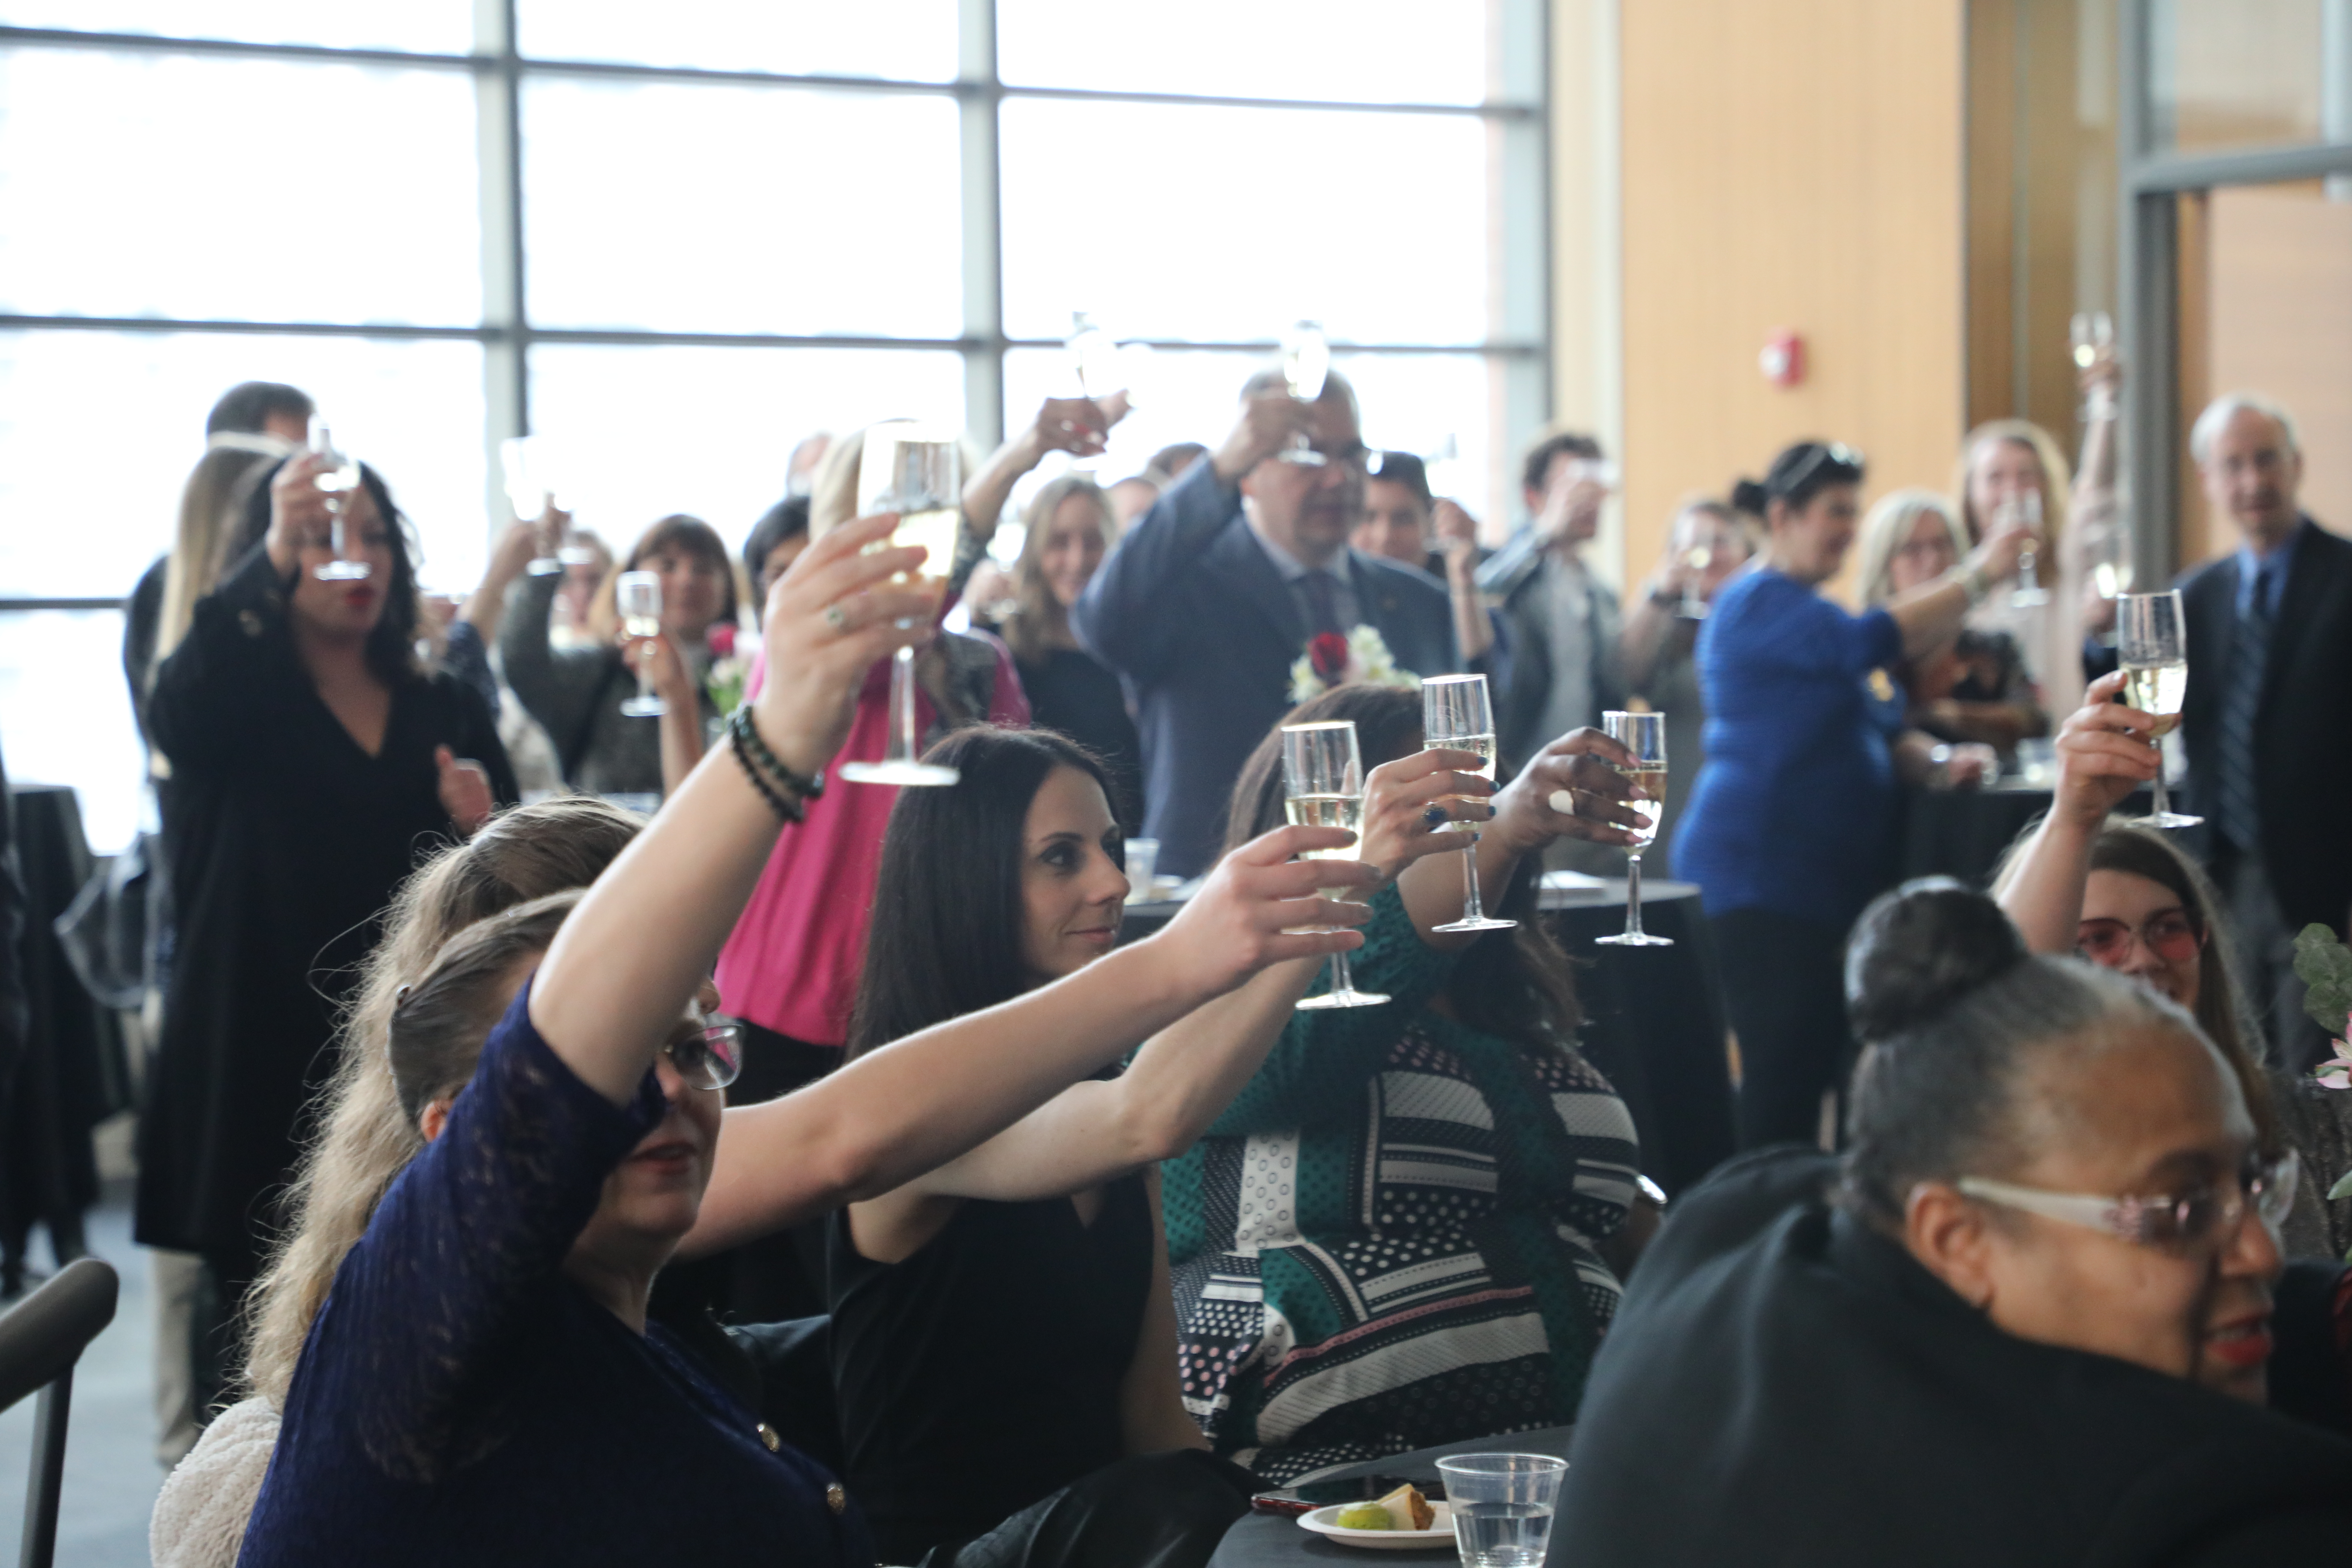 More than 100 students, alumni, faculty and staff toasted to the 10th anniversary of Loyola’s School of Communication. Photo by Audrey Palumbo.